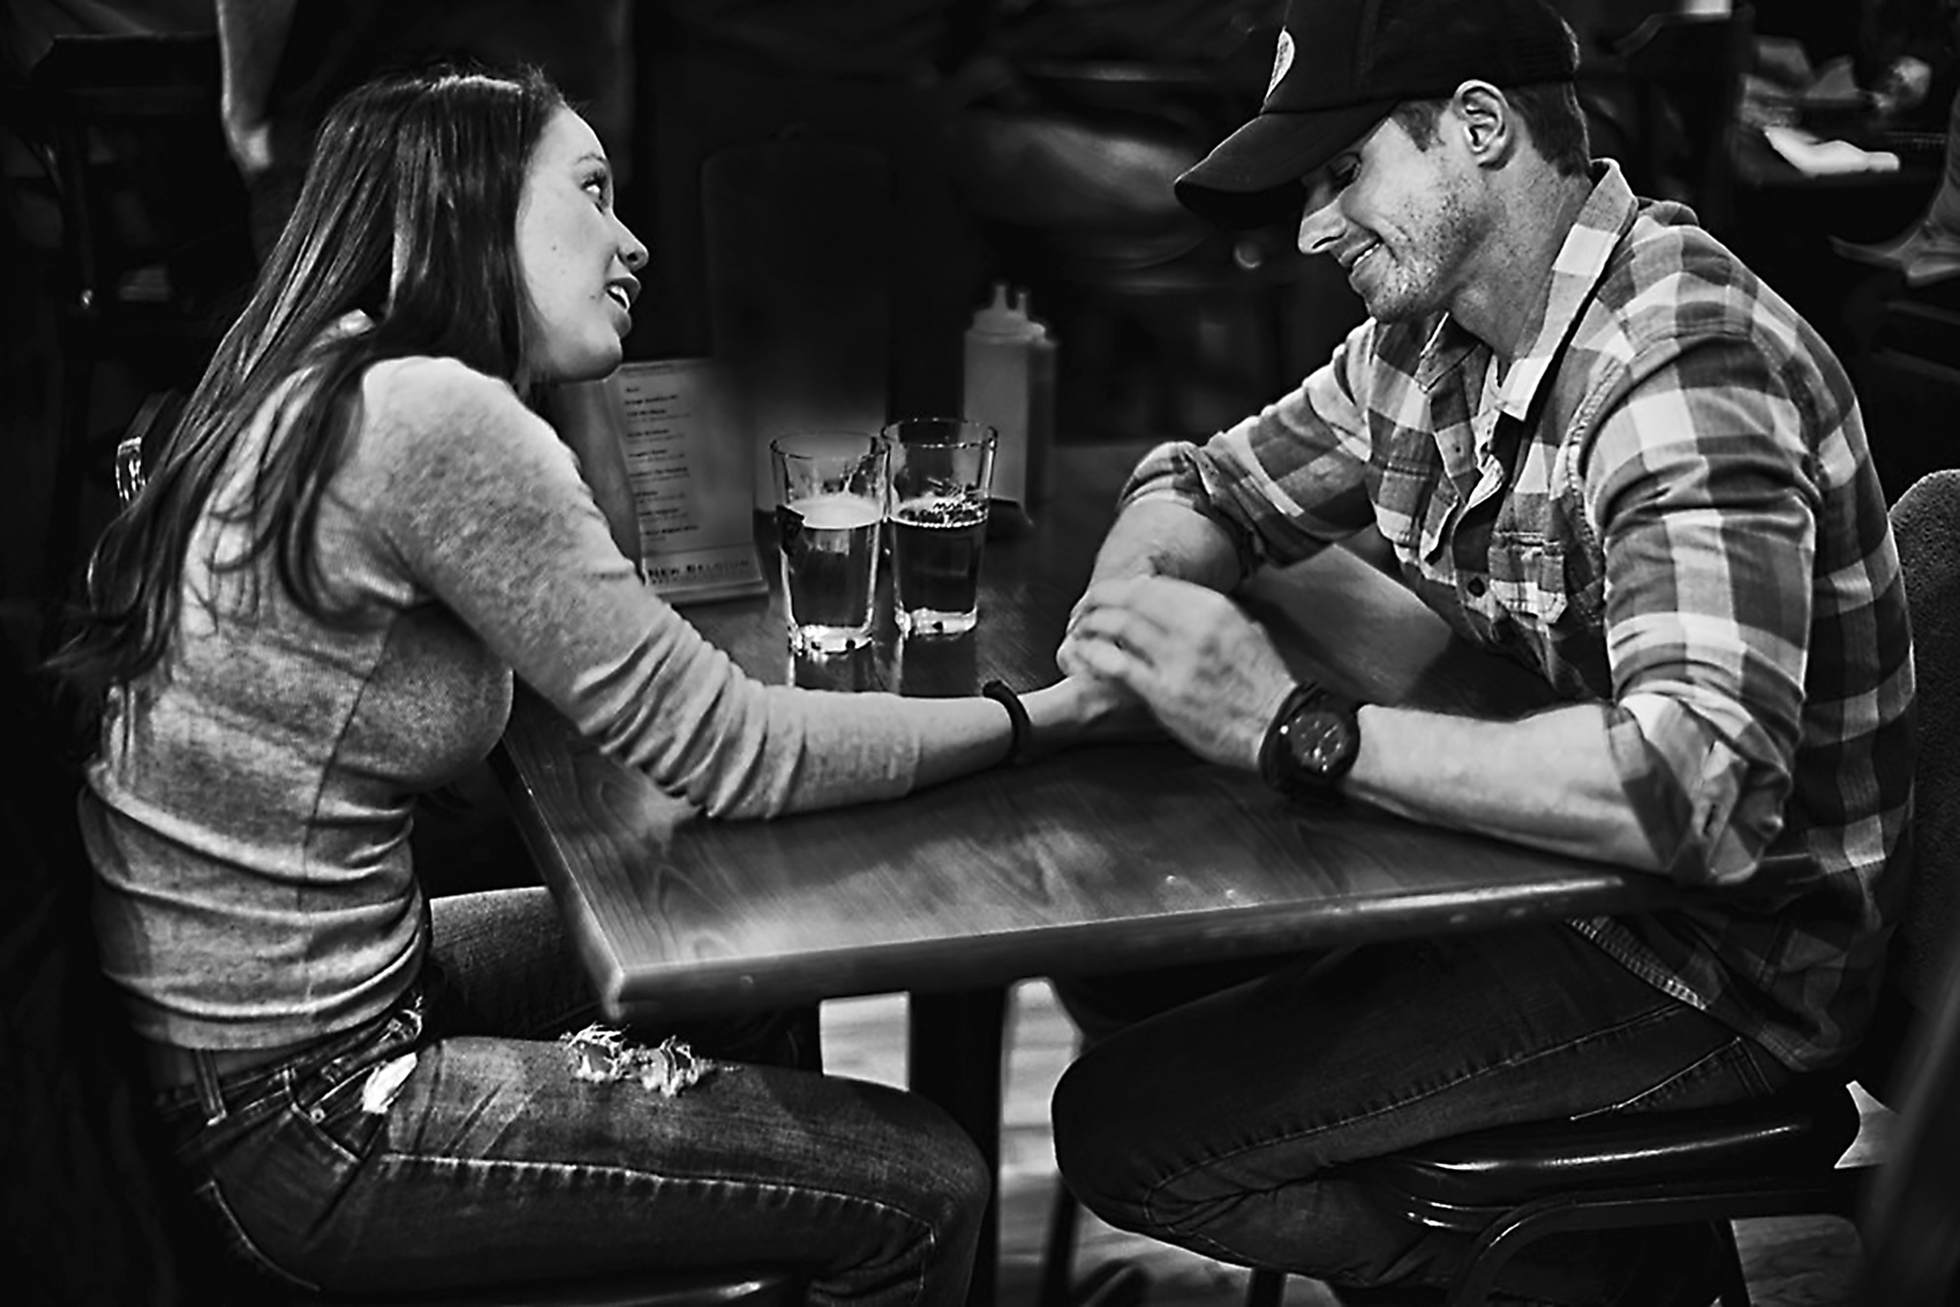 A woman and a man sitting in a restaurant holding hands across a table with two beers on it. They are both smiling, and she is looking at him while he is looking down. They are dressed casually in jeans and he has a cap on.